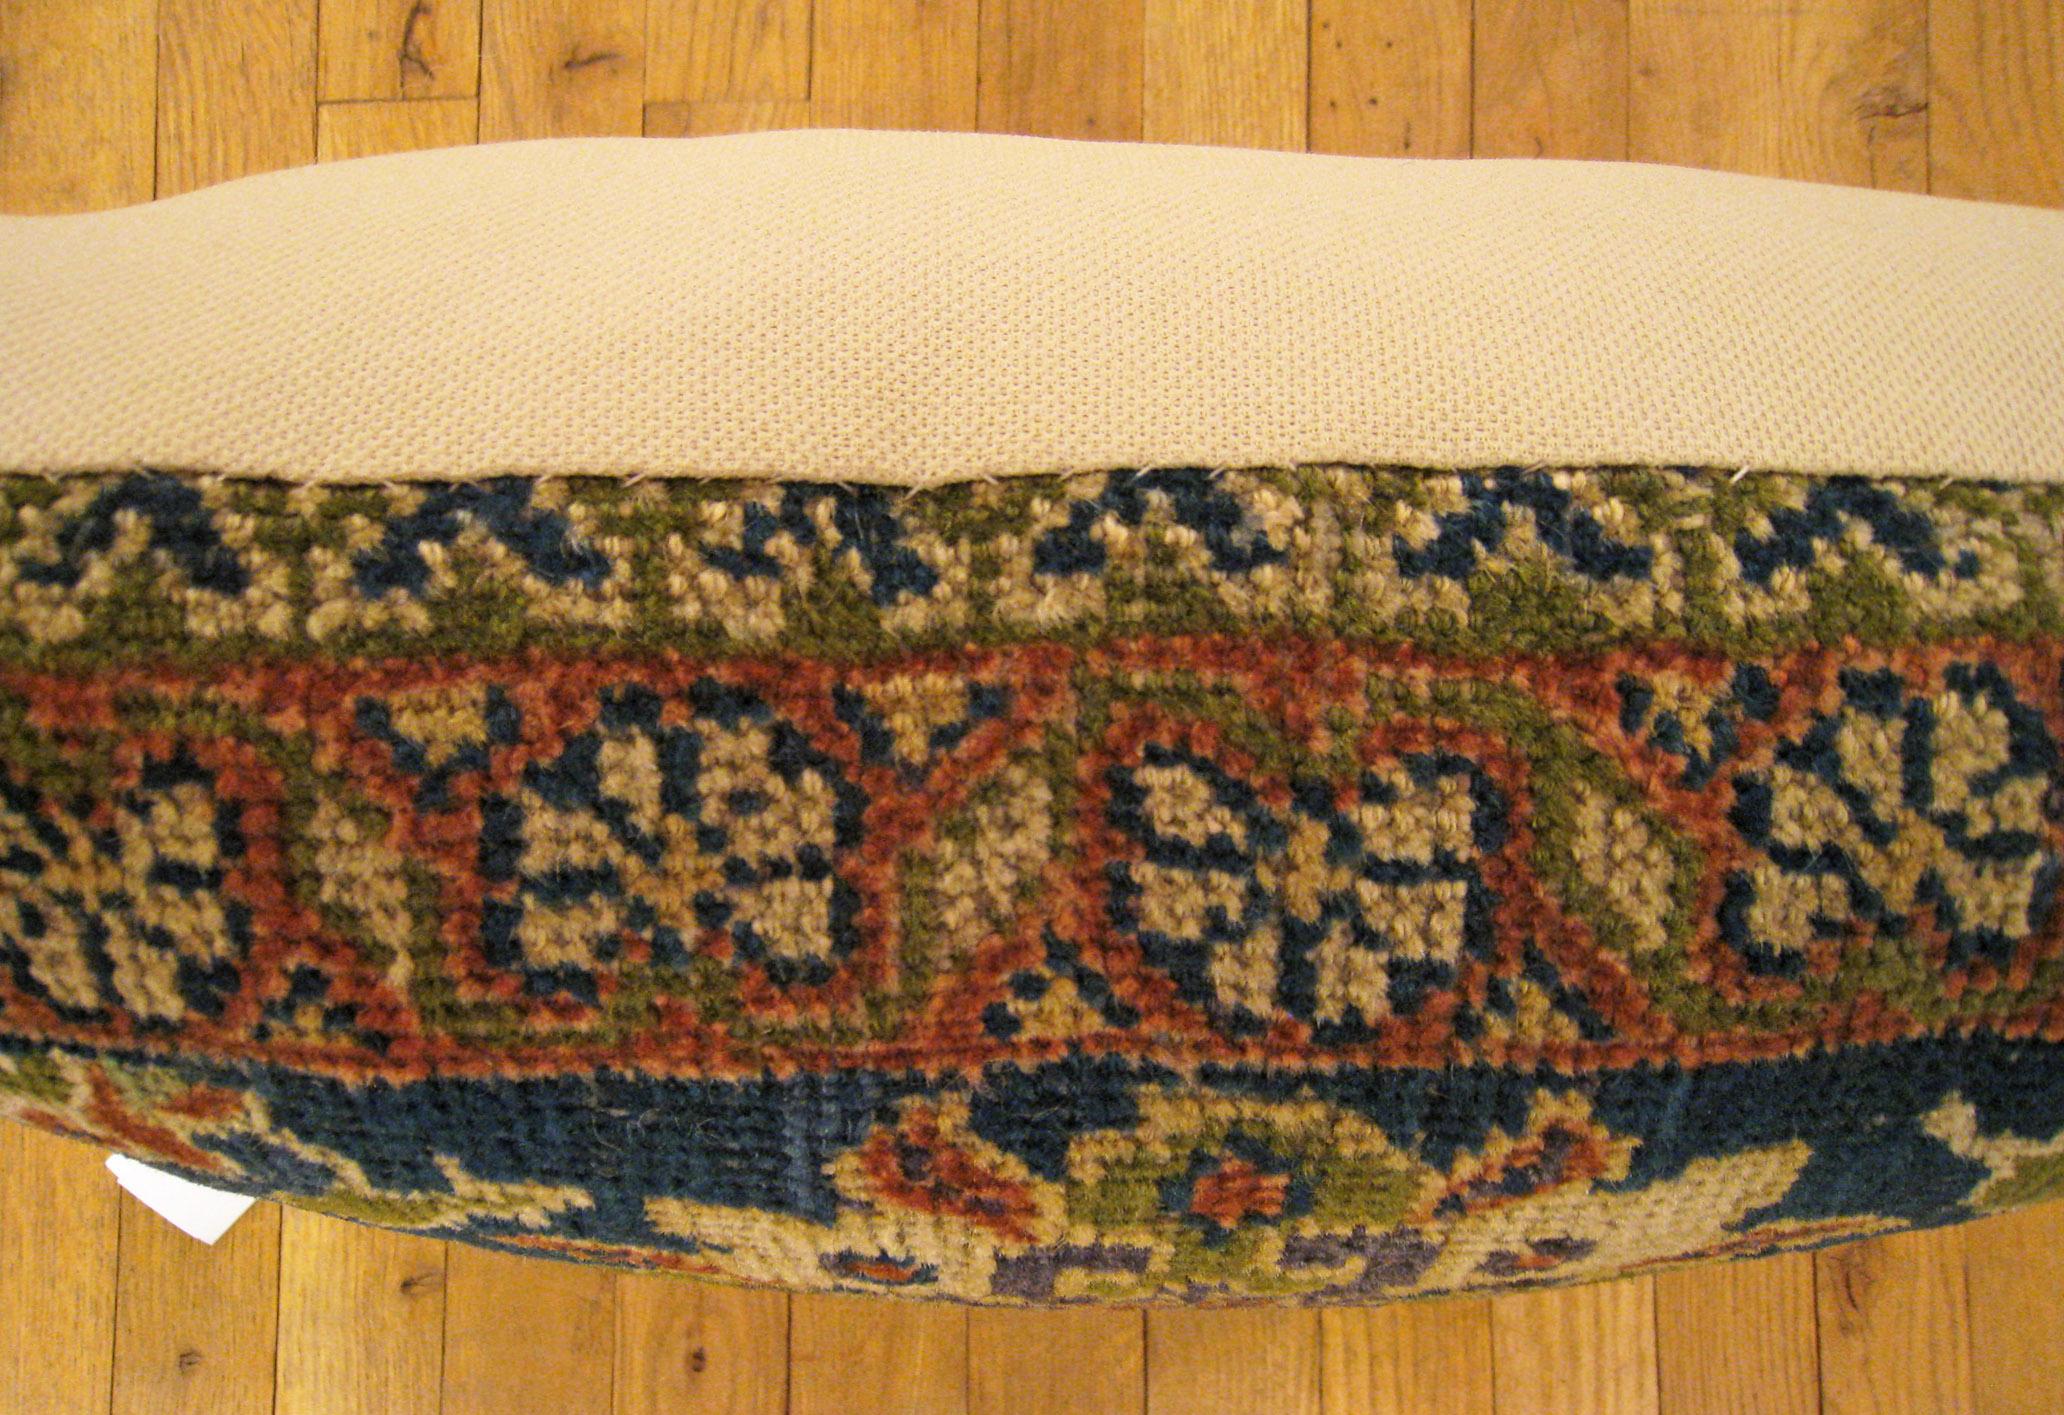 Decorative Antique Persian Sultanabad Carpet Pillow with Floral Elements In Good Condition For Sale In New York, NY